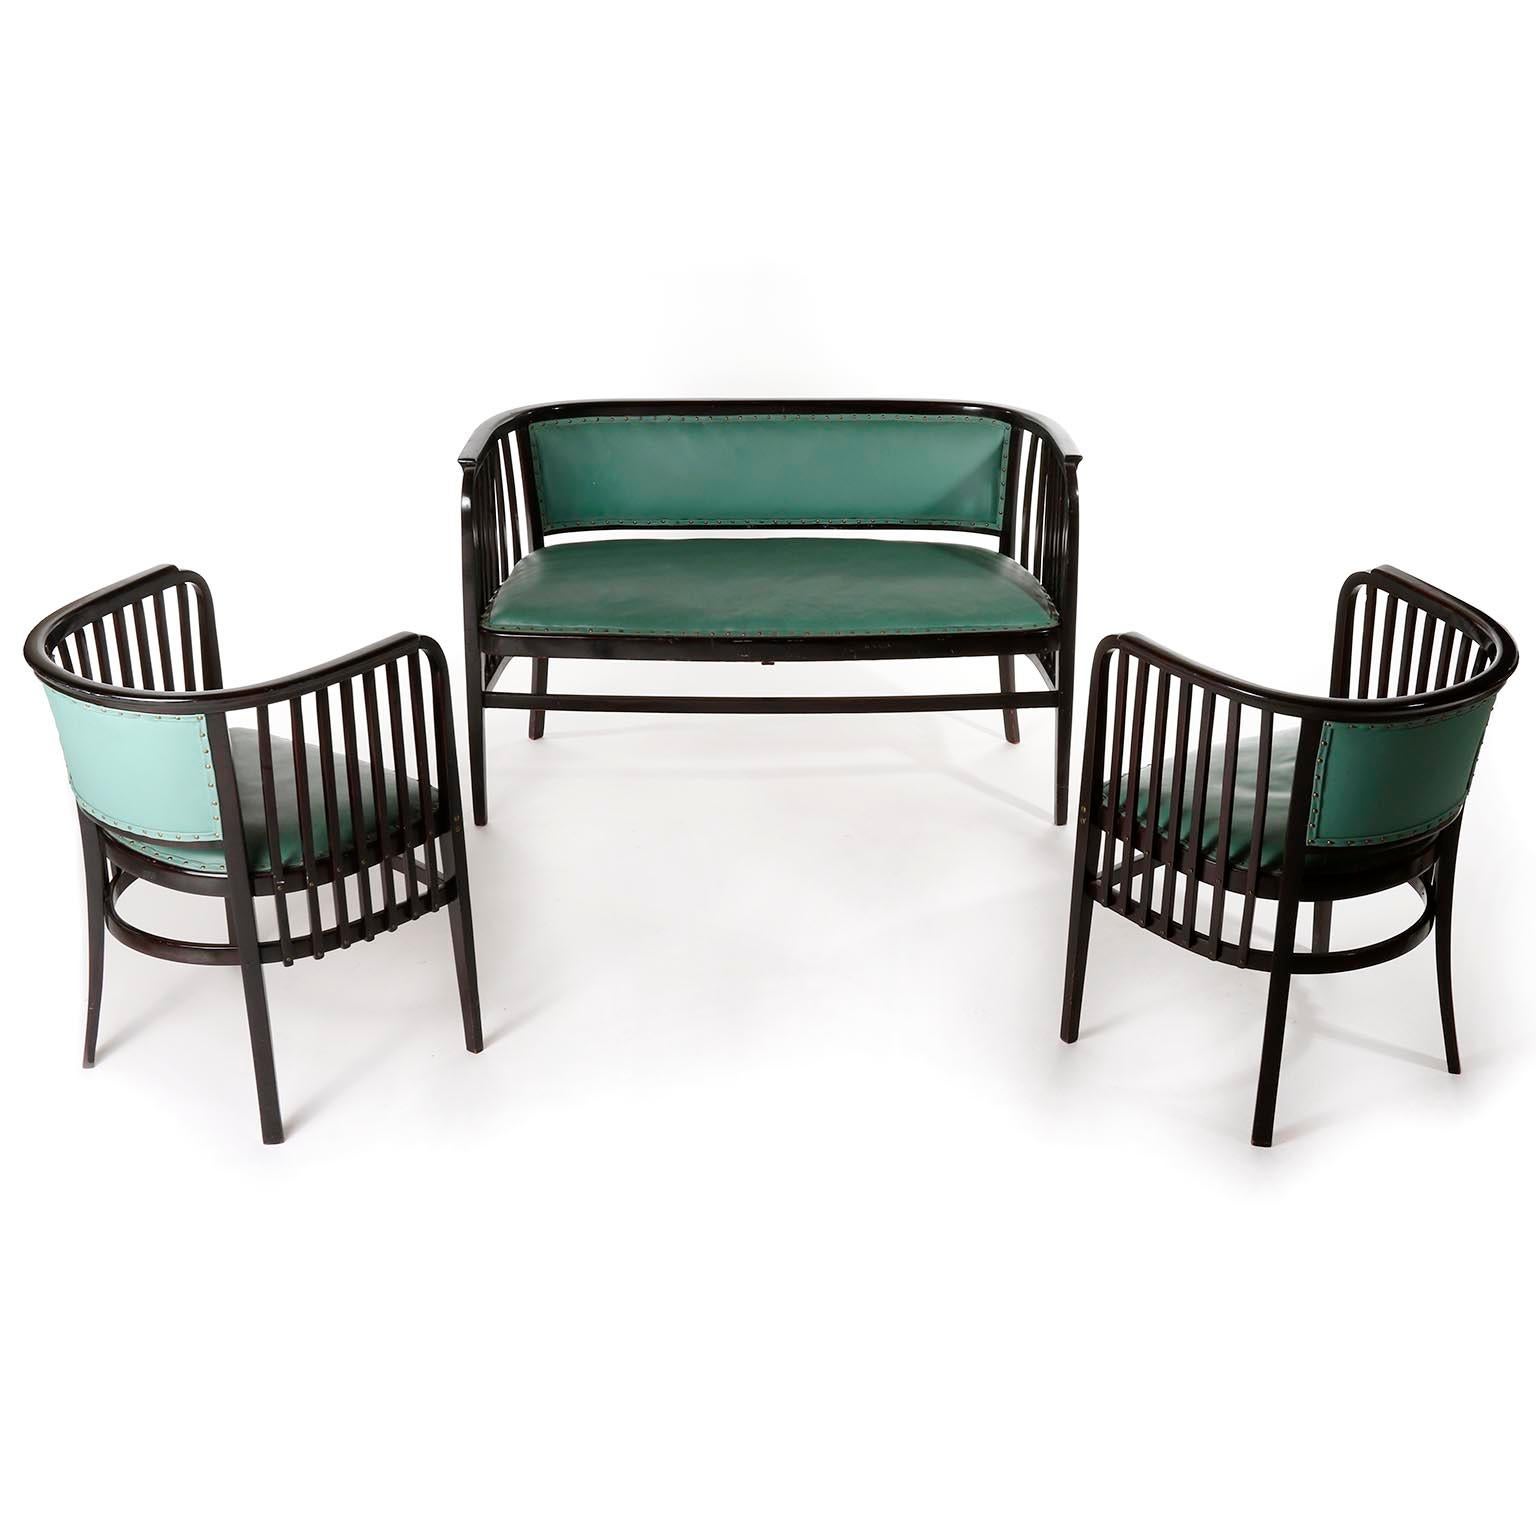 Early 20th Century Pair of Armchairs Chairs Marcel Kammerer, Thonet, Turquoise Green Leather, 1910 For Sale